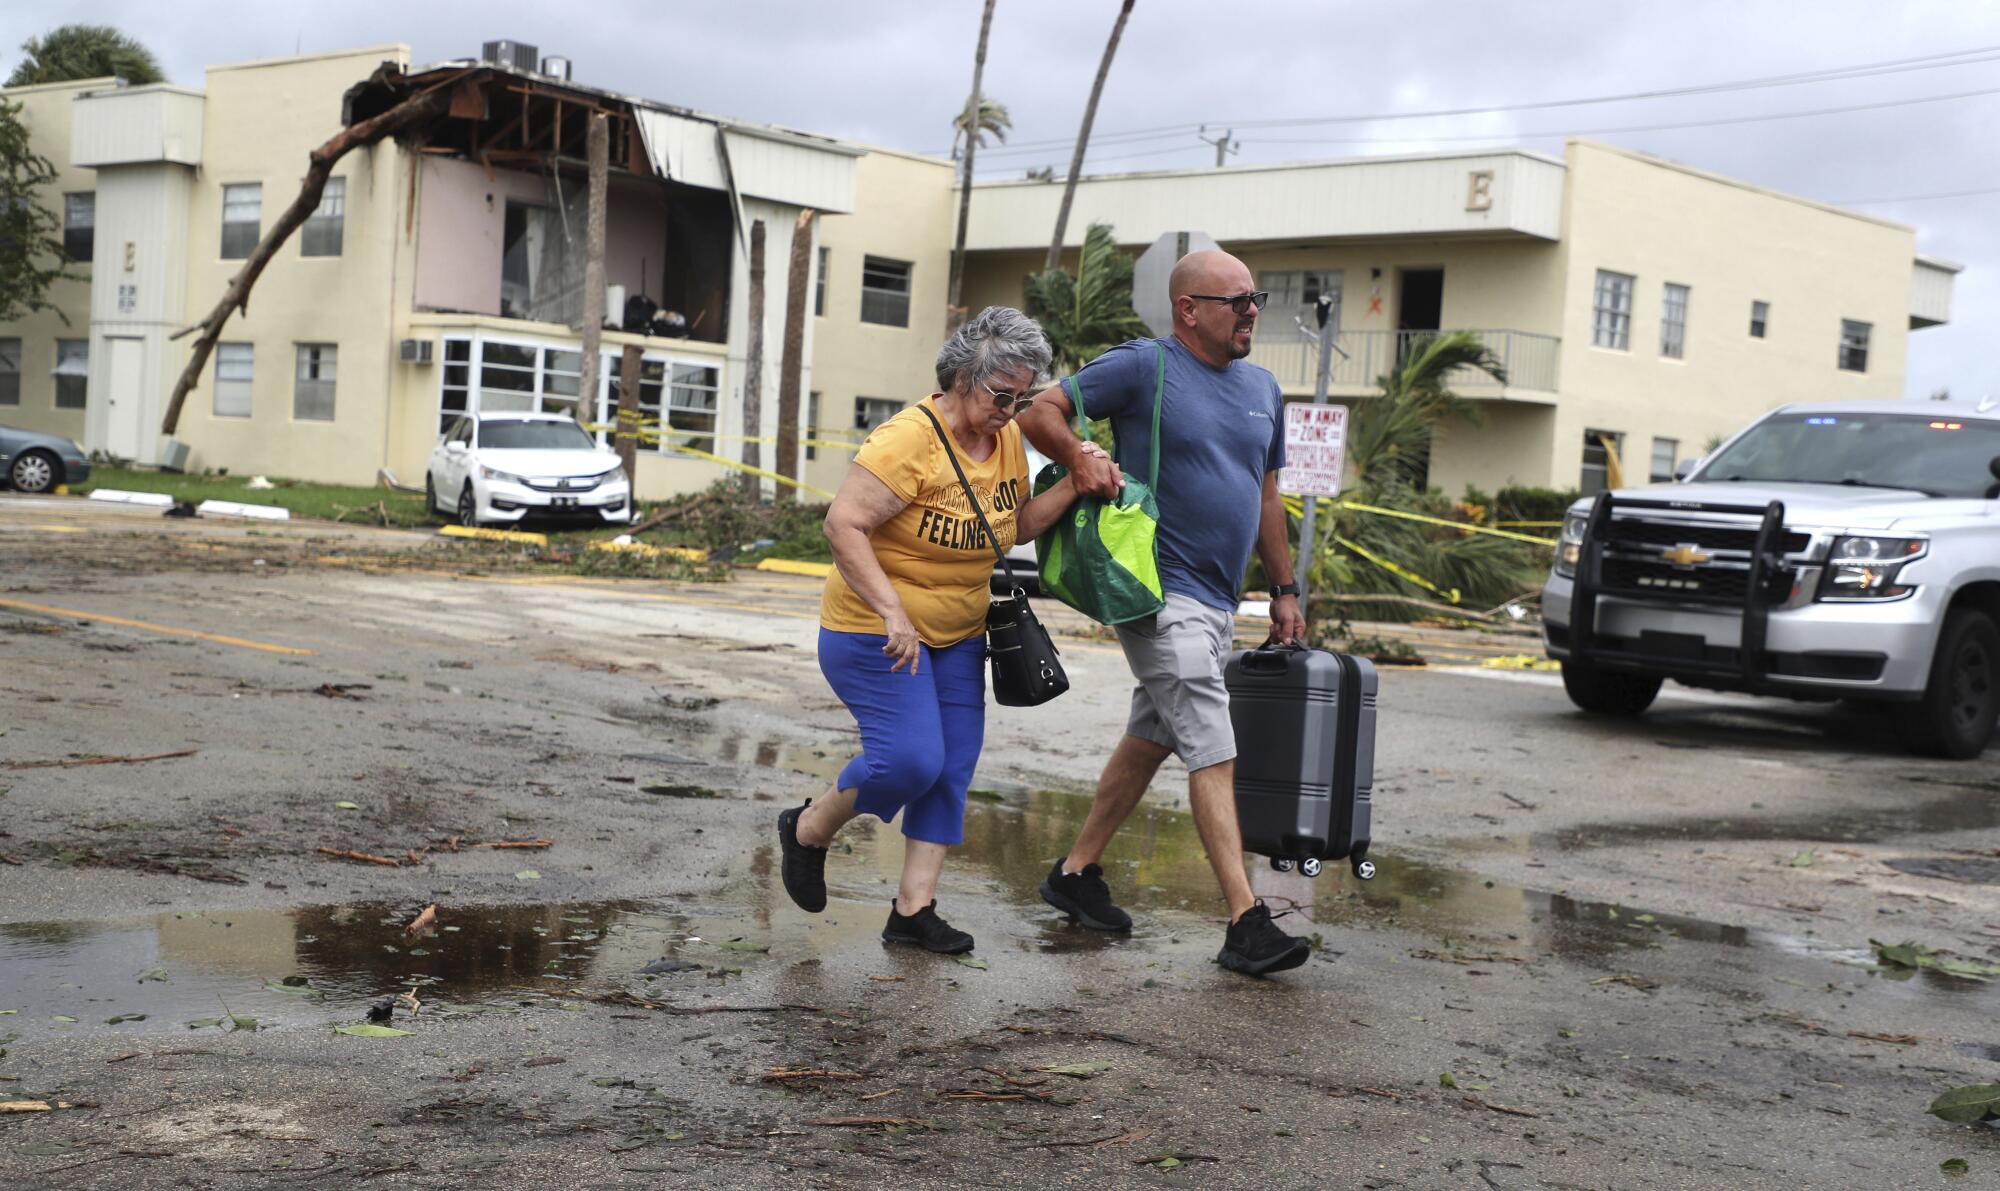 A woman is escorted by her son from a damaged home.